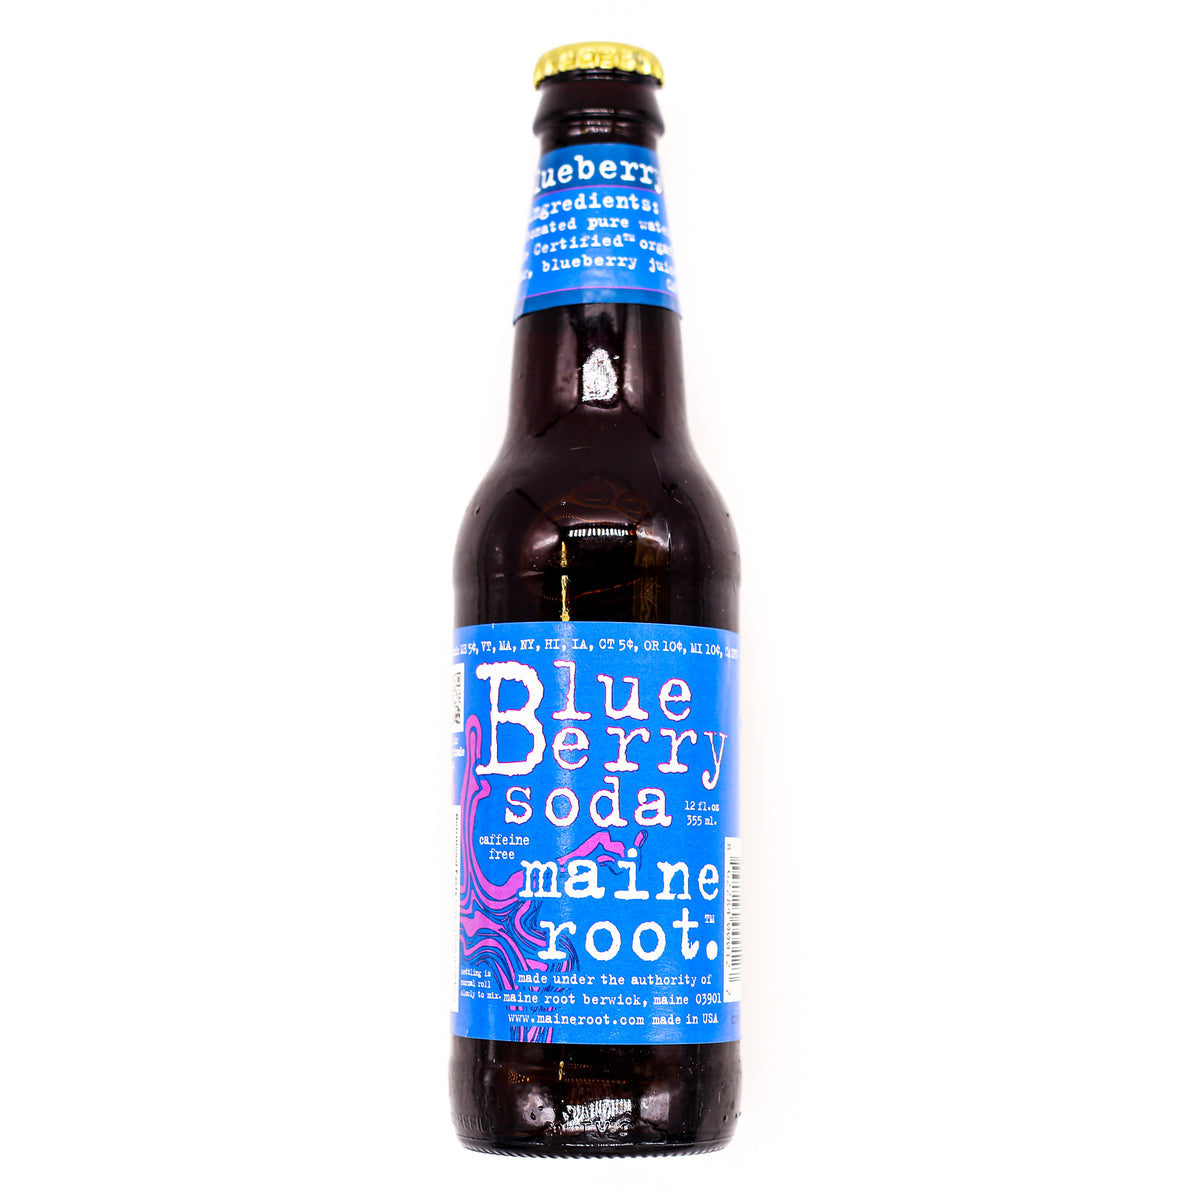 Maine Root Blueberry Brew